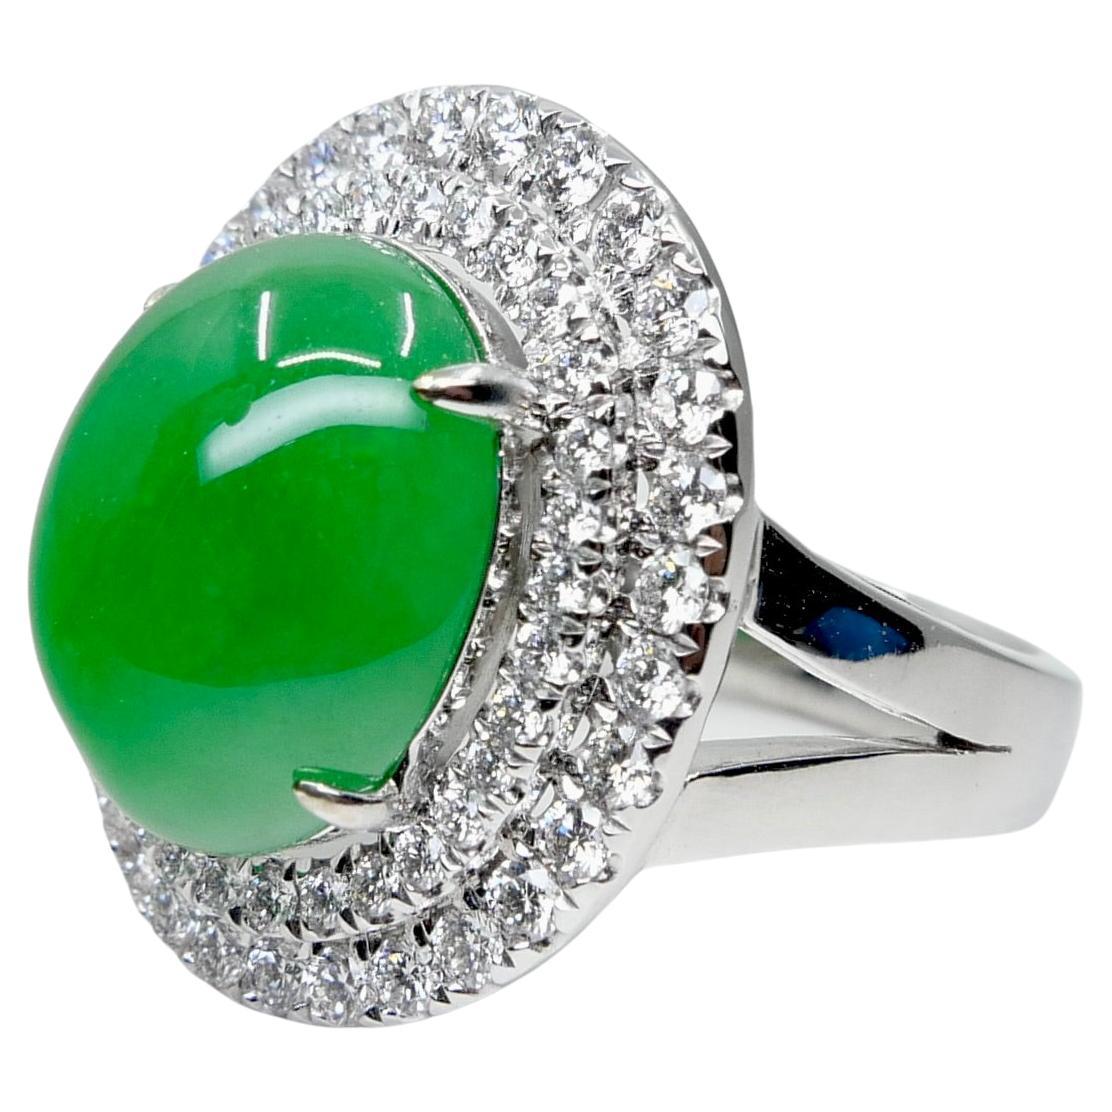 Certified 6.71 Cts Jade & Diamond Cocktail Ring. XXL. Apple Green With High Dome For Sale